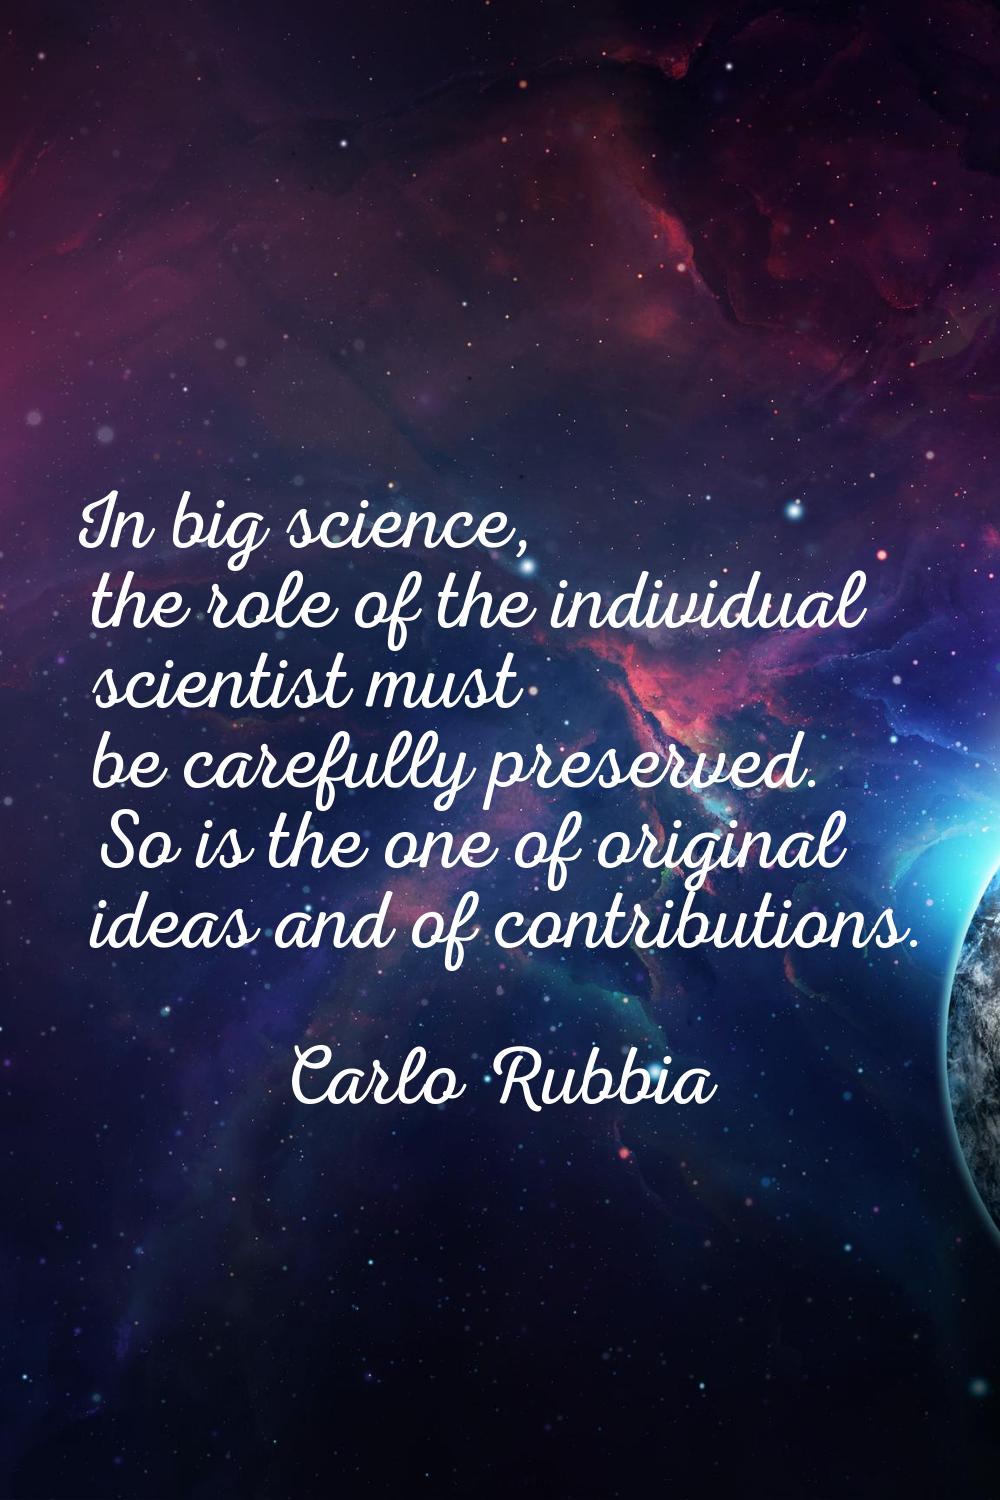 In big science, the role of the individual scientist must be carefully preserved. So is the one of 